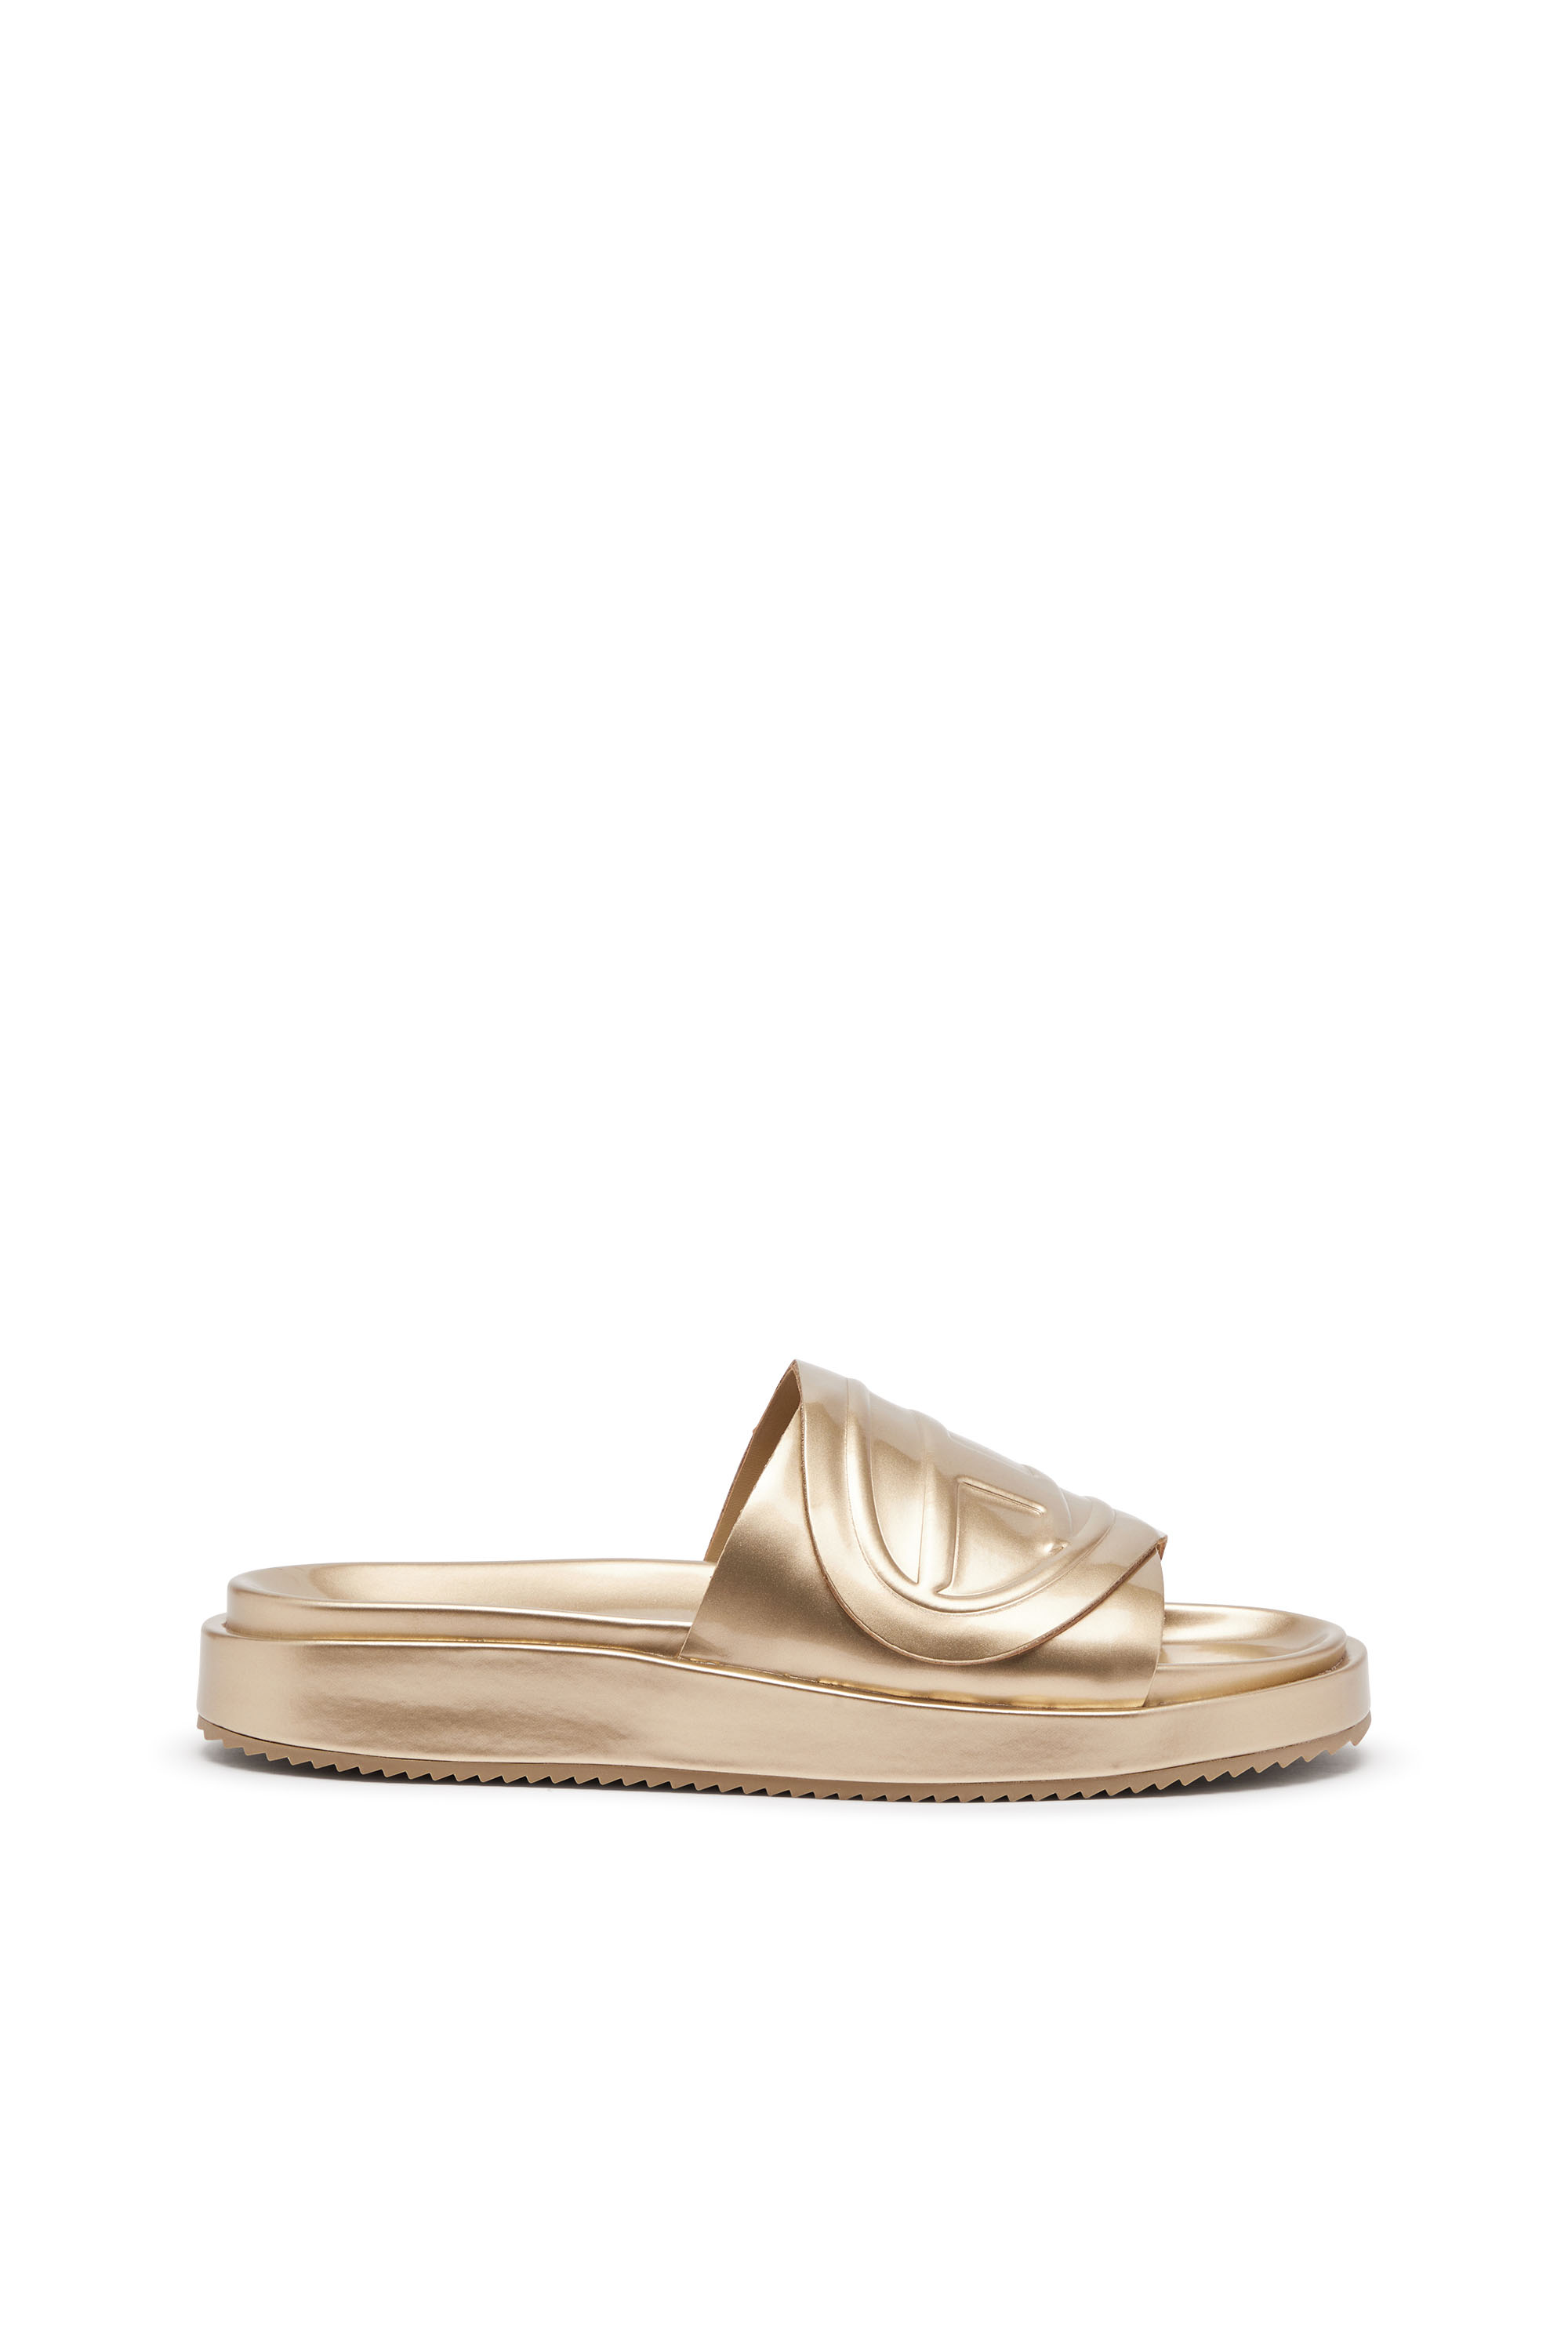 Diesel - SA-SLIDE D OVAL W, Woman Sa-Slide D-Metallic slide sandals with Oval D strap in Oro - Image 1